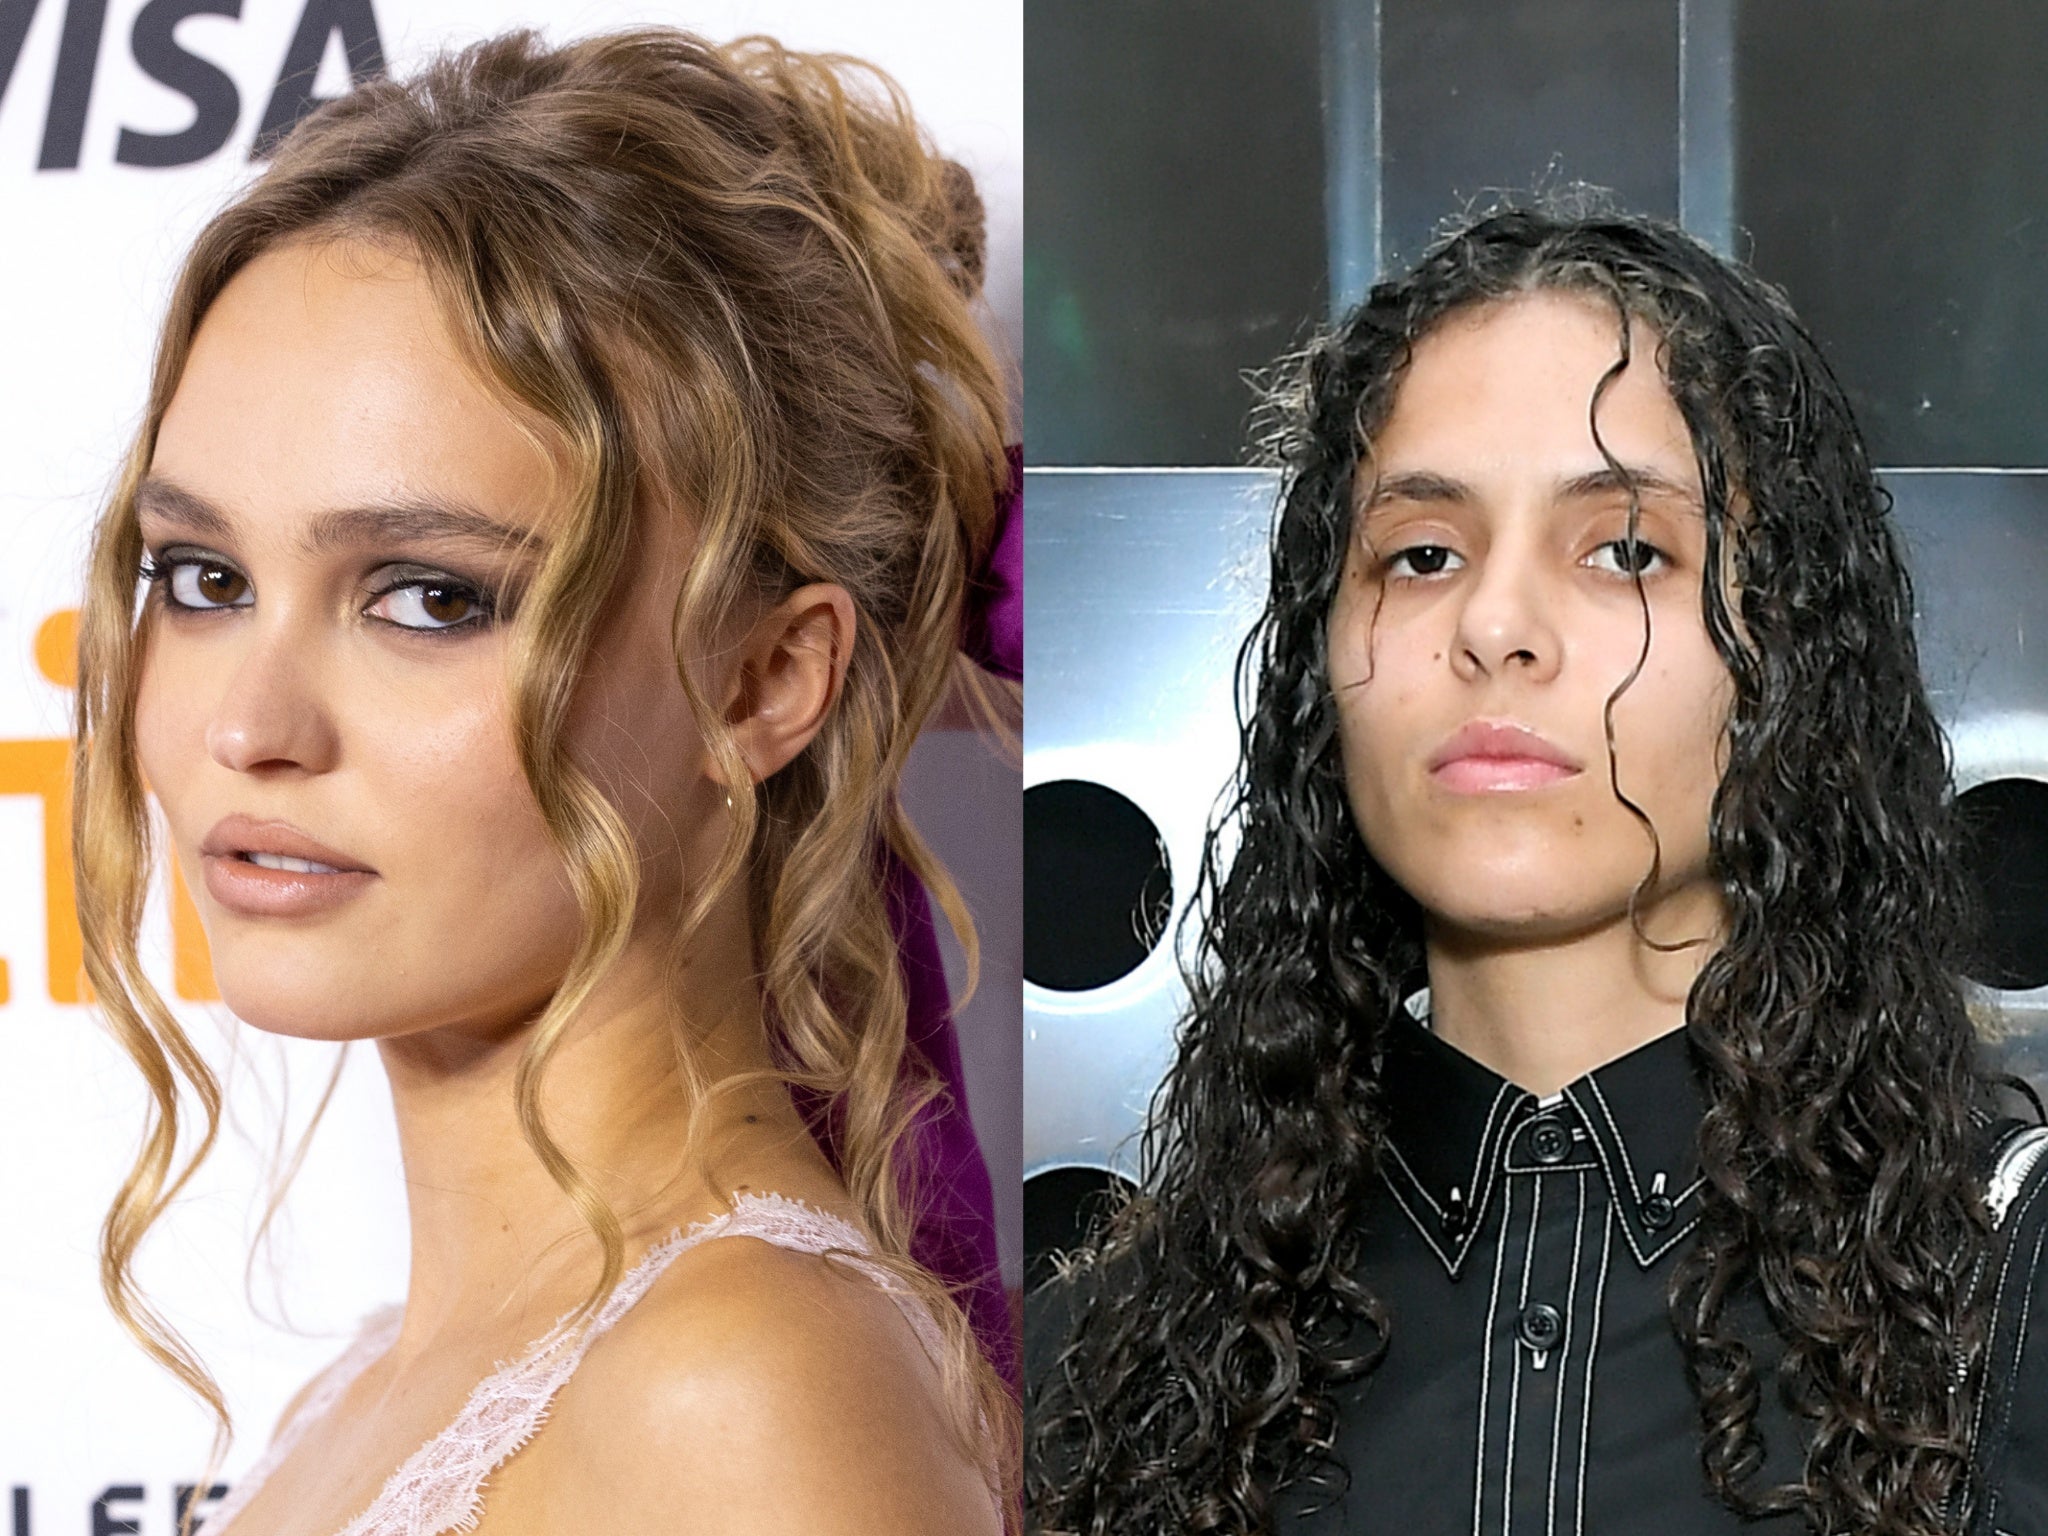 Lily-Rose Depp confirms romance with rapper 070 Shake My crush The Independent image